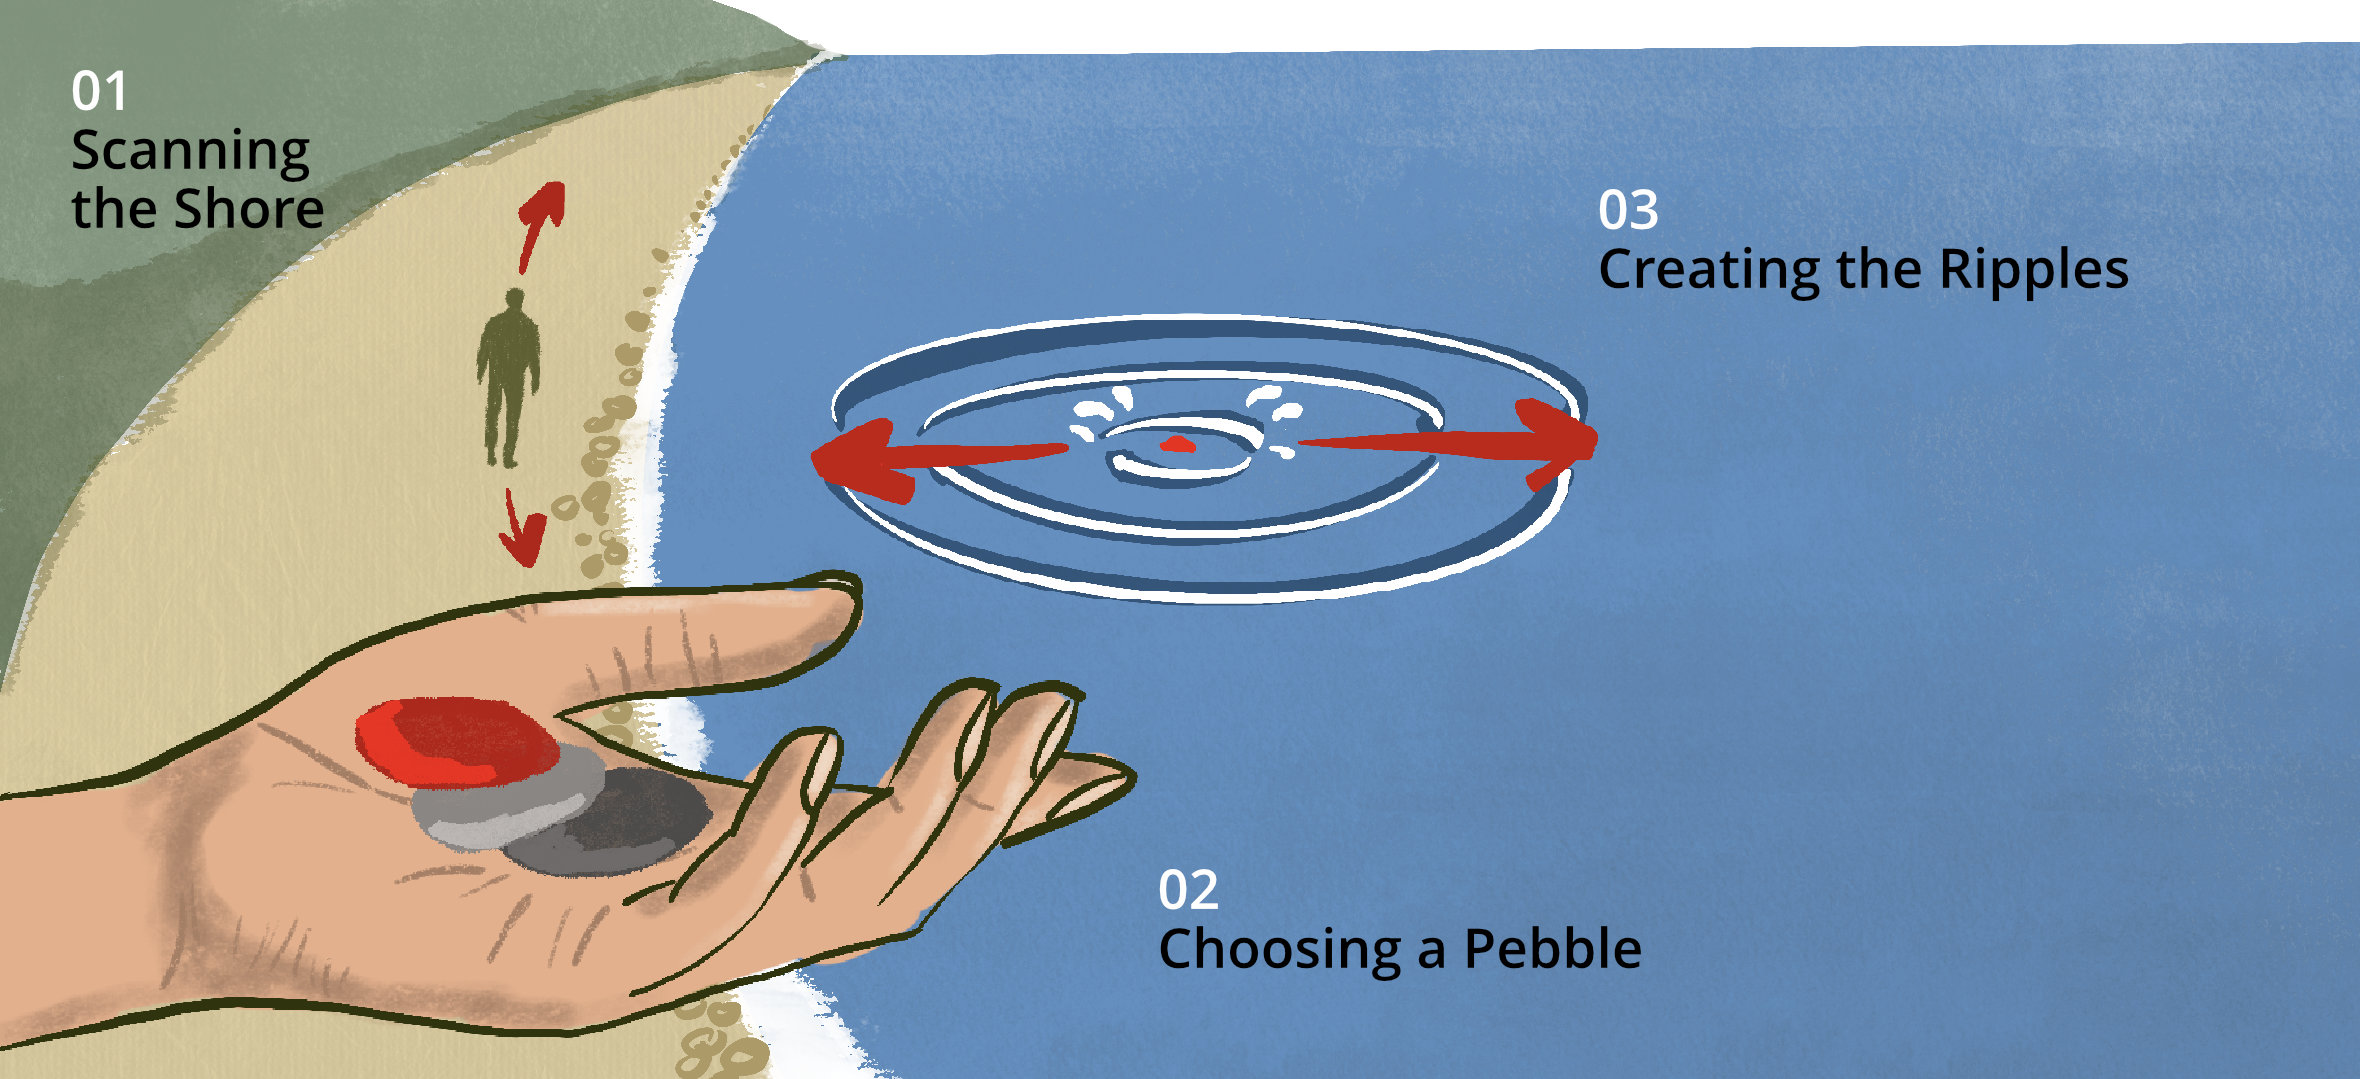 The three steps of the Future Ripples method: (01) scanning the shore, (02) choosing a pebble and (03) creating ripples.